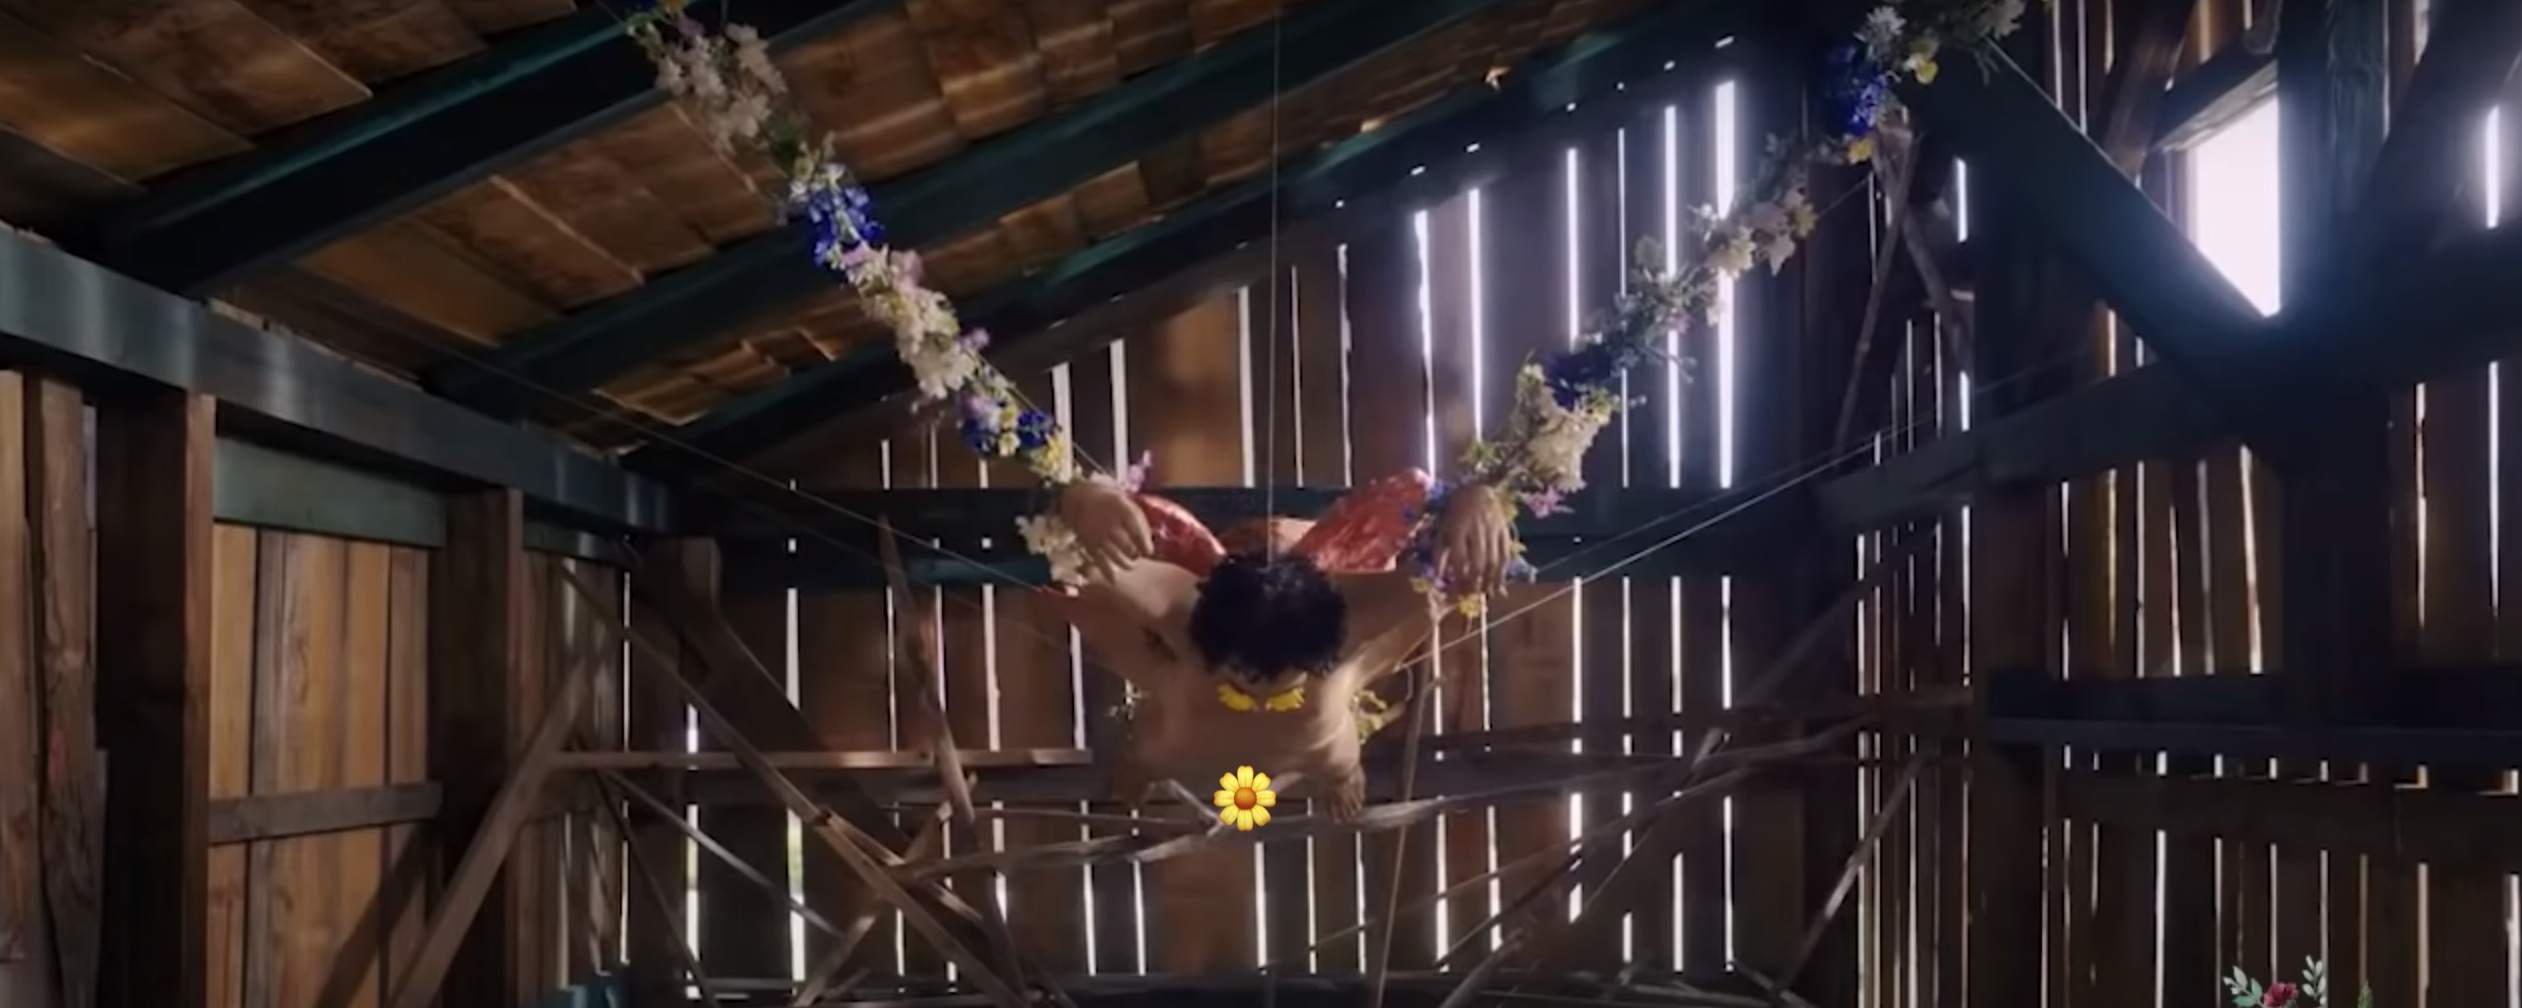 The Creepiest Part Of ‘Midsommar’ That Most People Missed | Thought Catalog